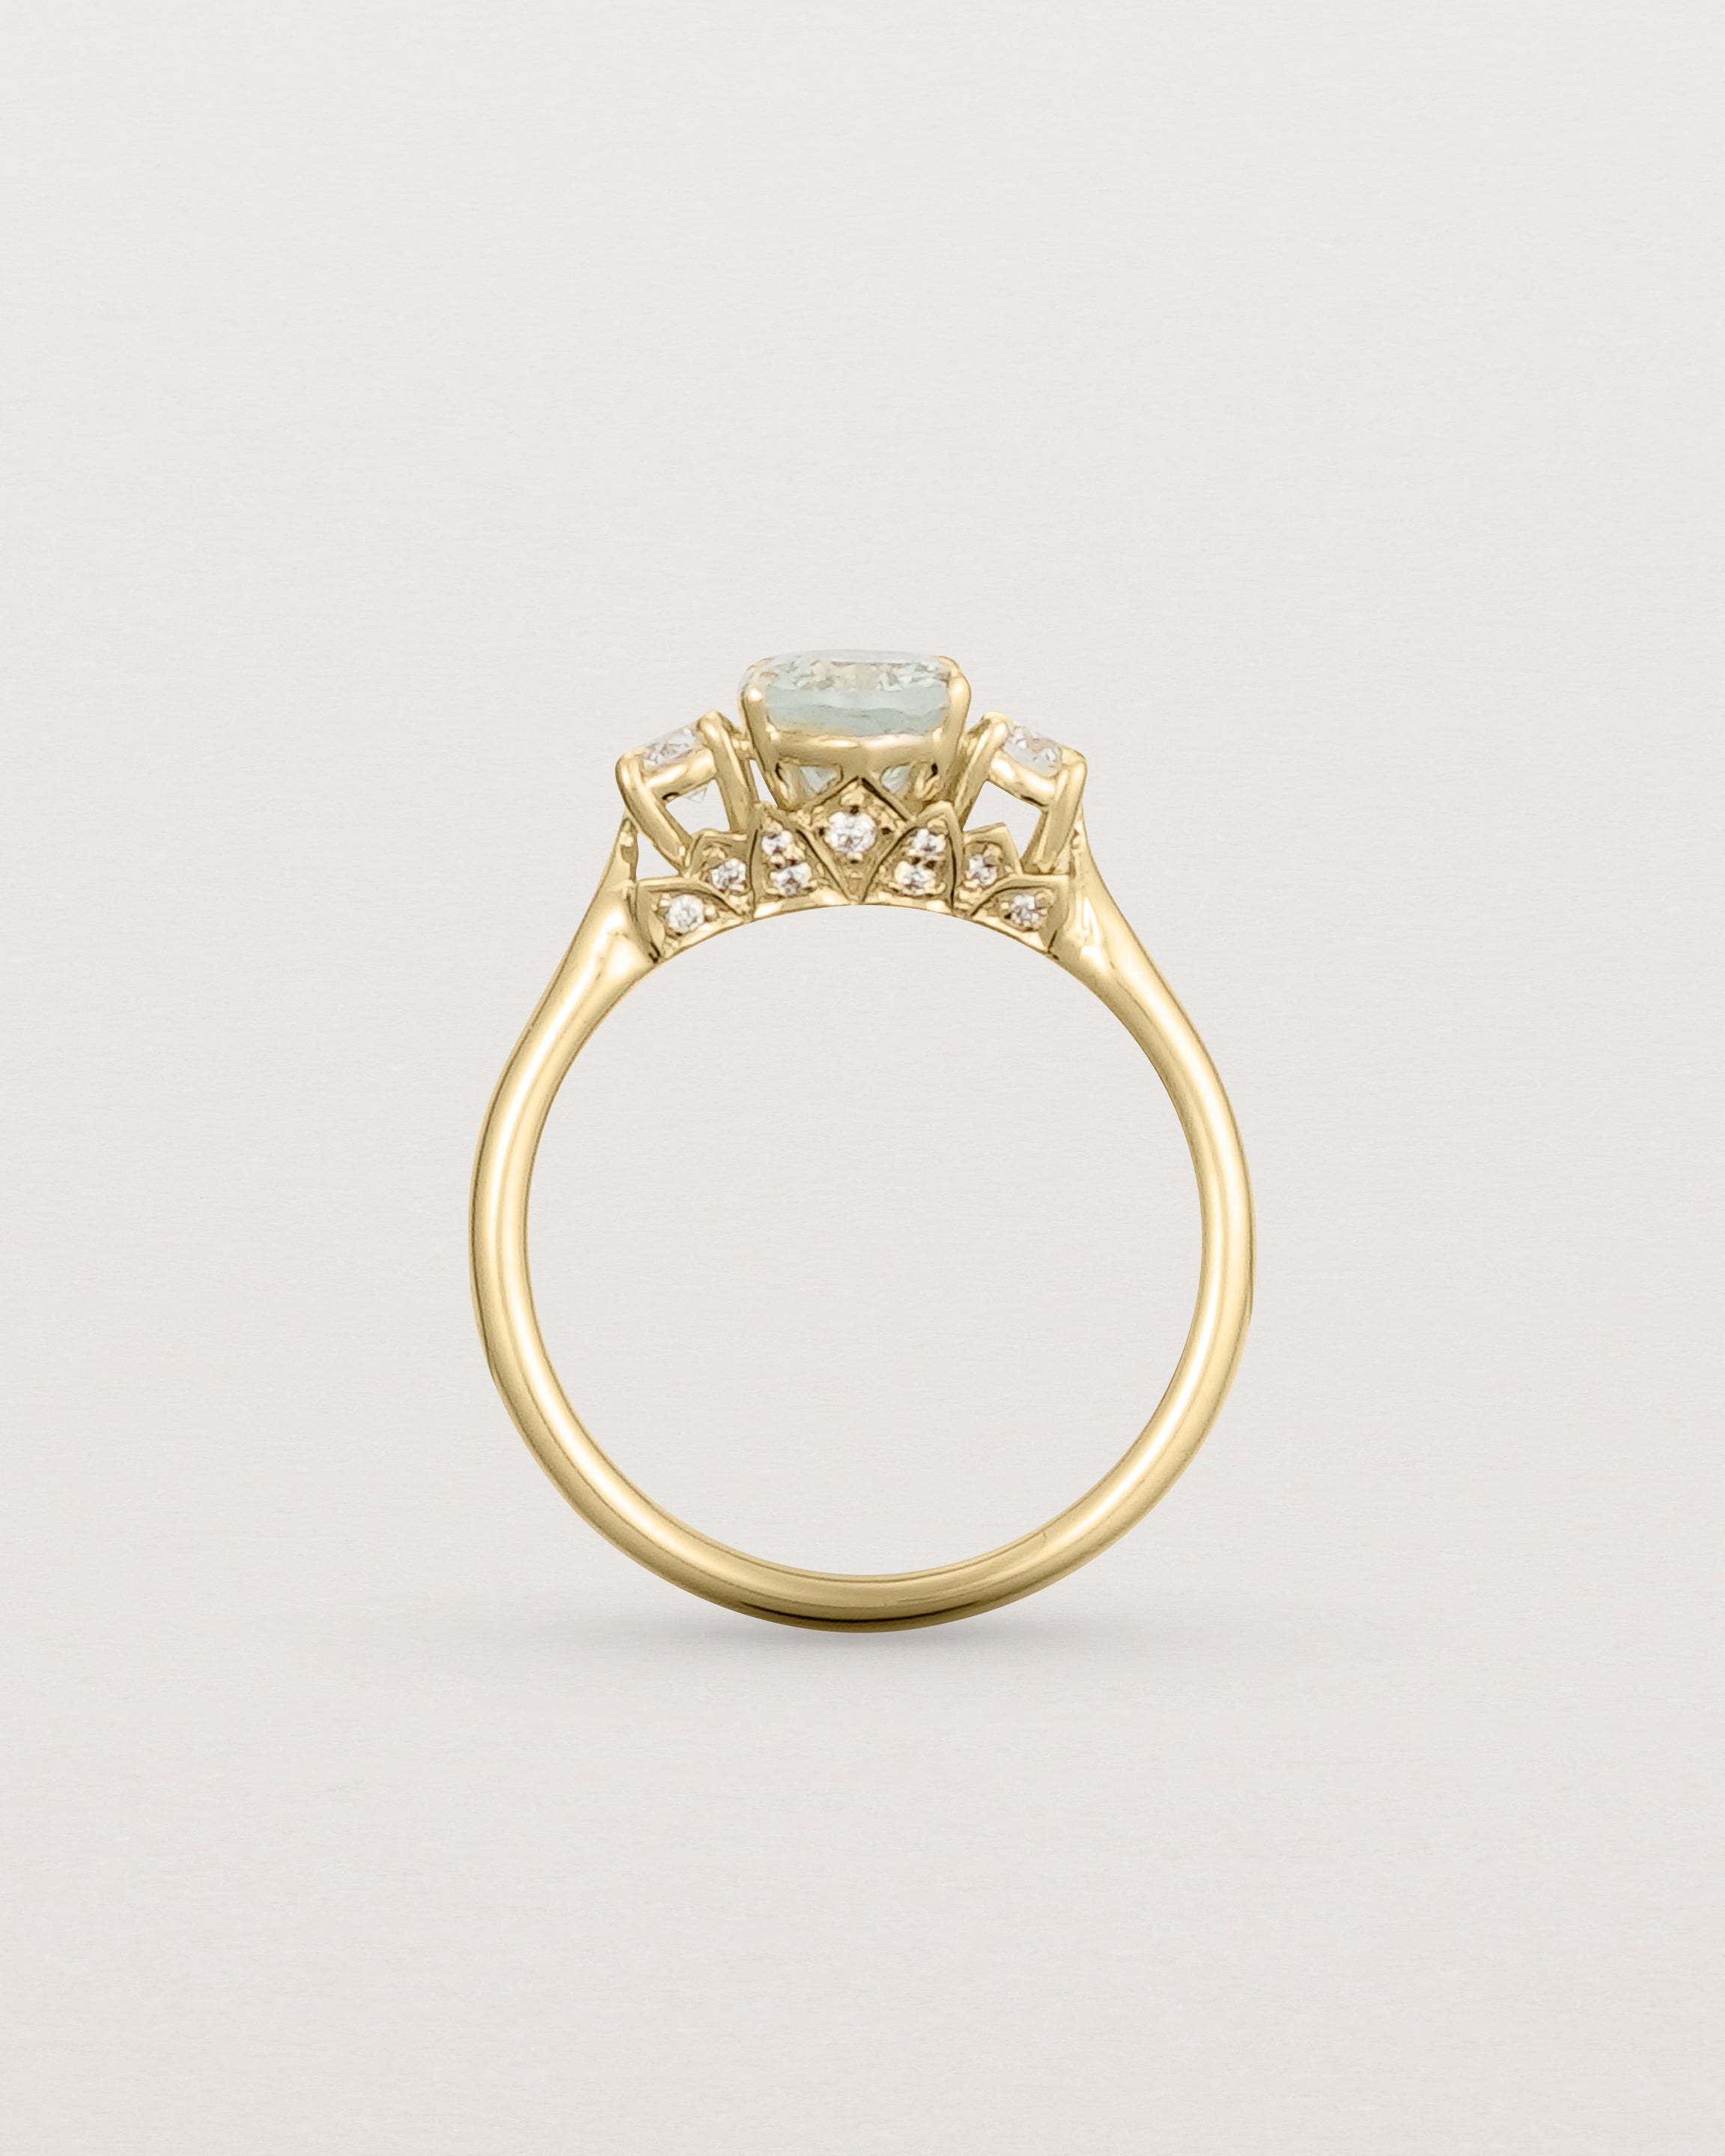 Standing view of the Laurel Oval Trio Ring | Green Amethyst | Yellow Gold.